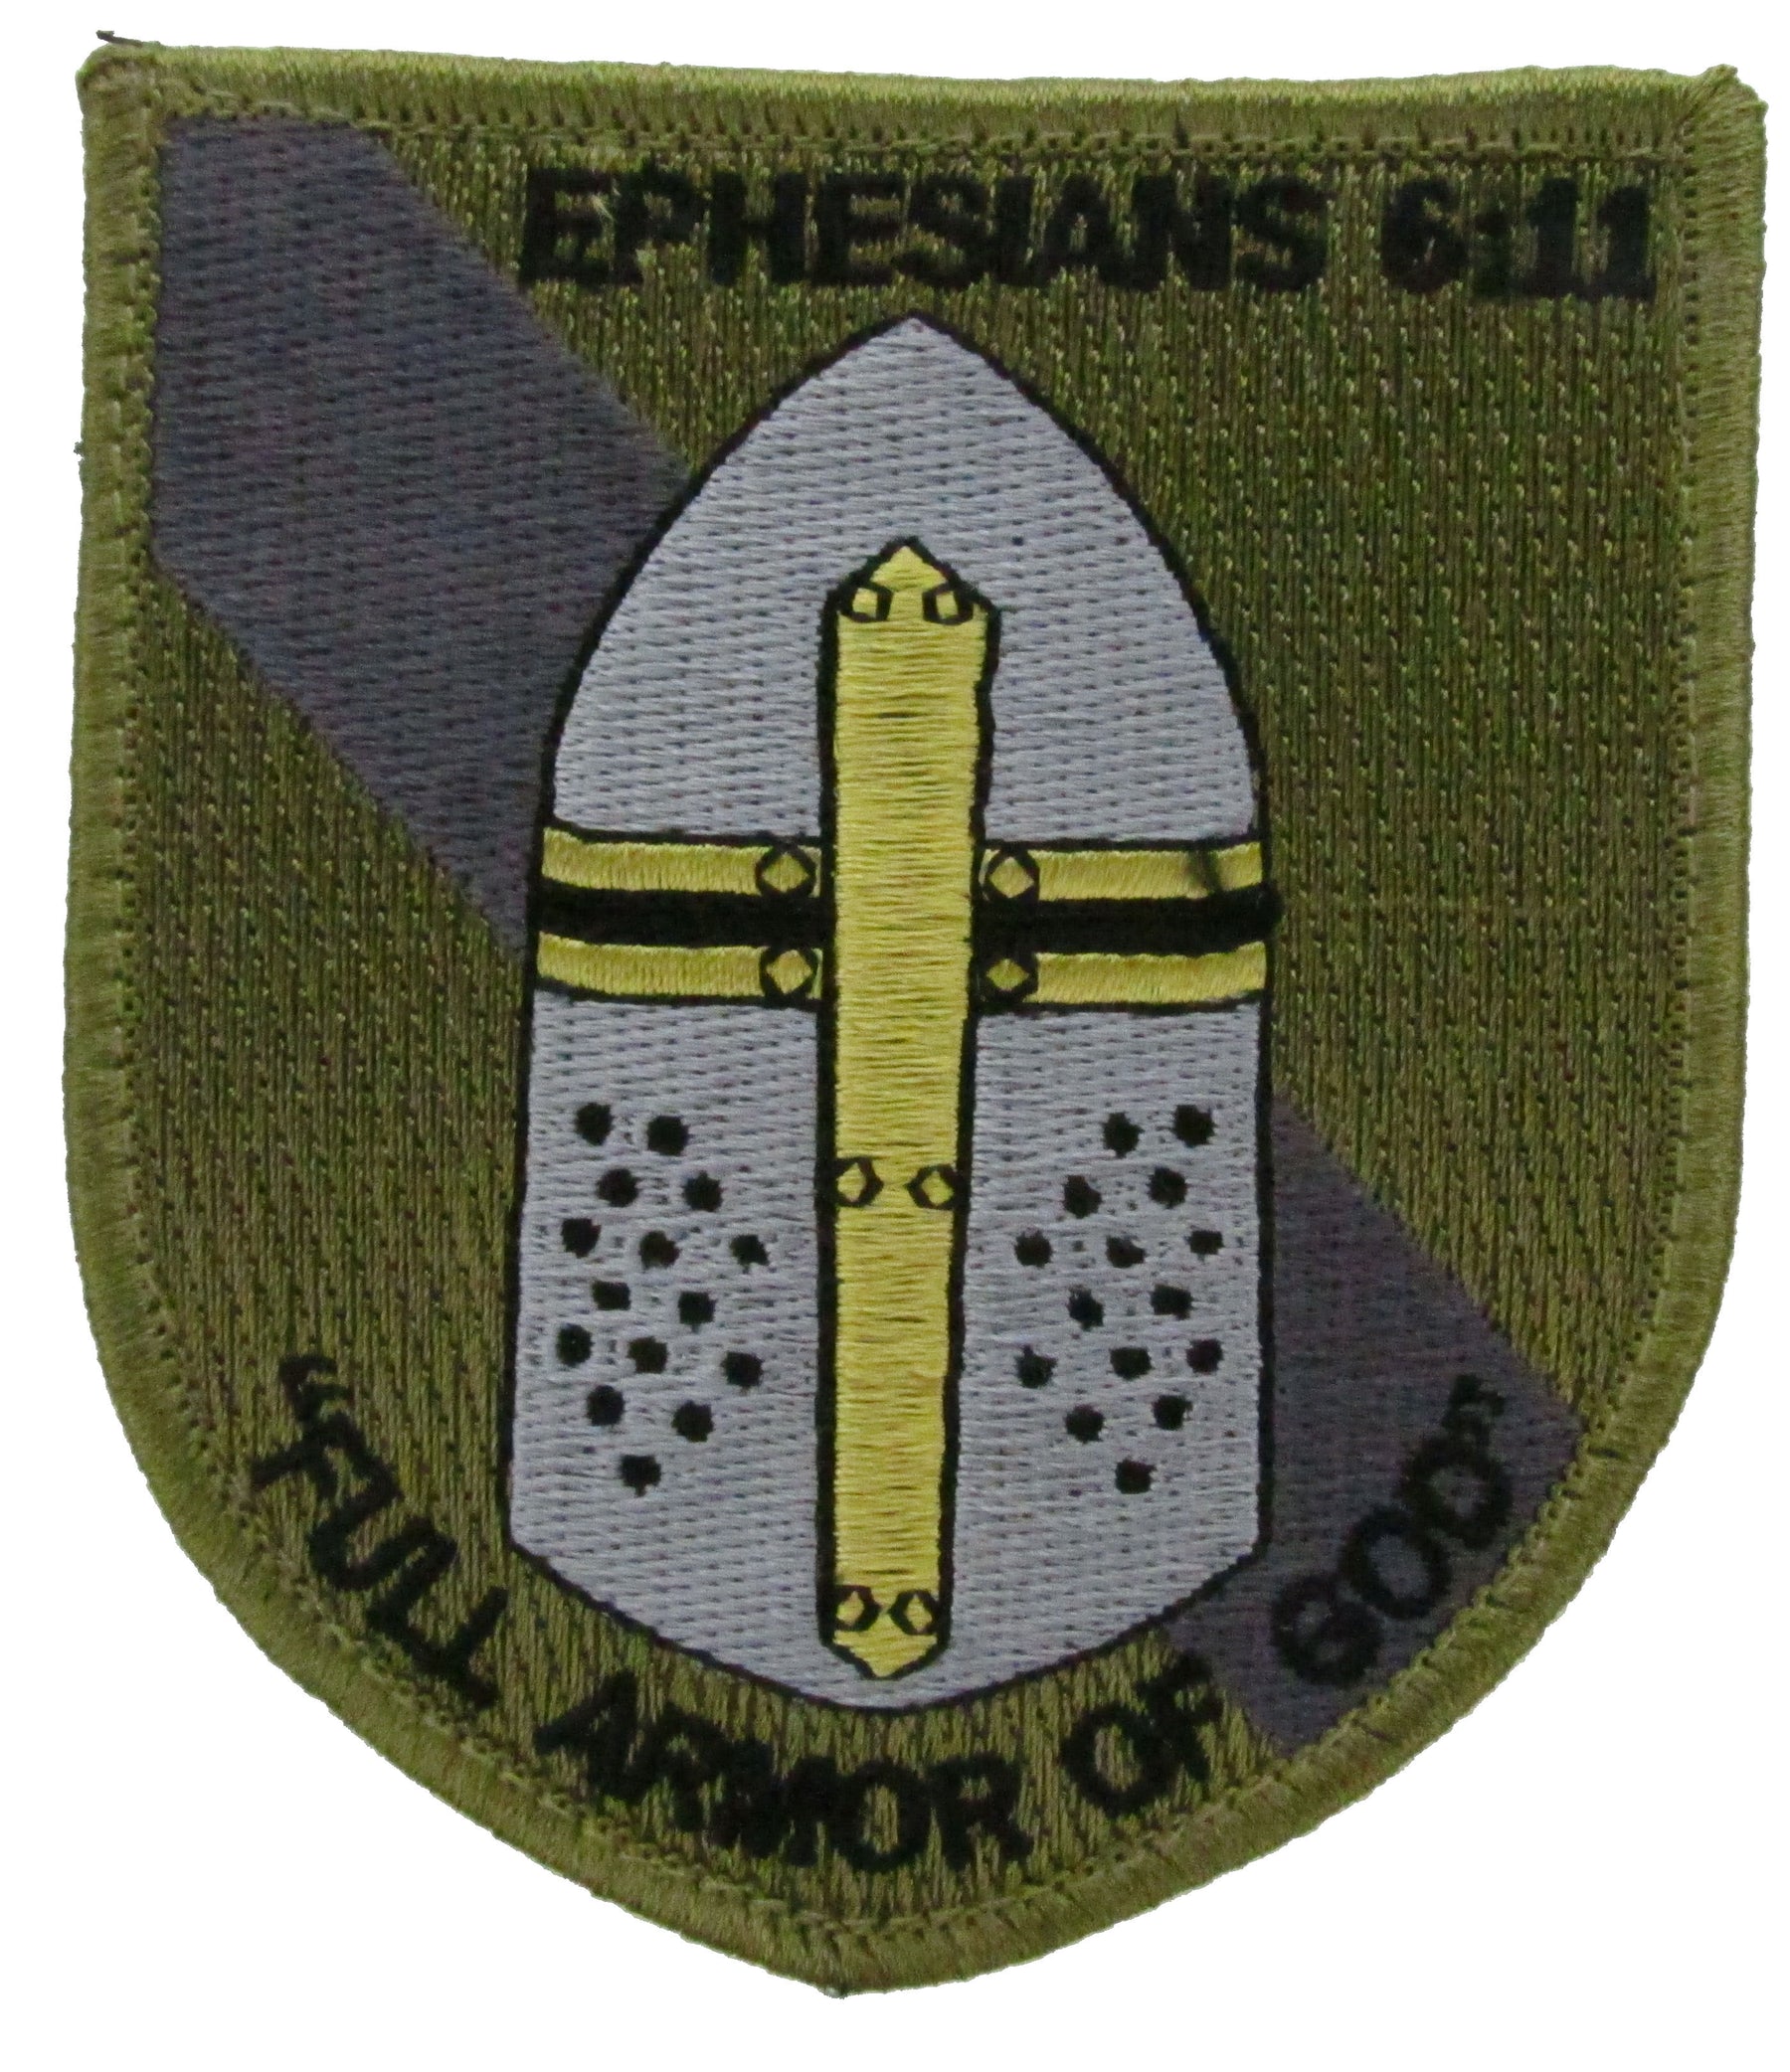 Ephesians 6:11 Full Armor of God Morale Patch - Various Colors